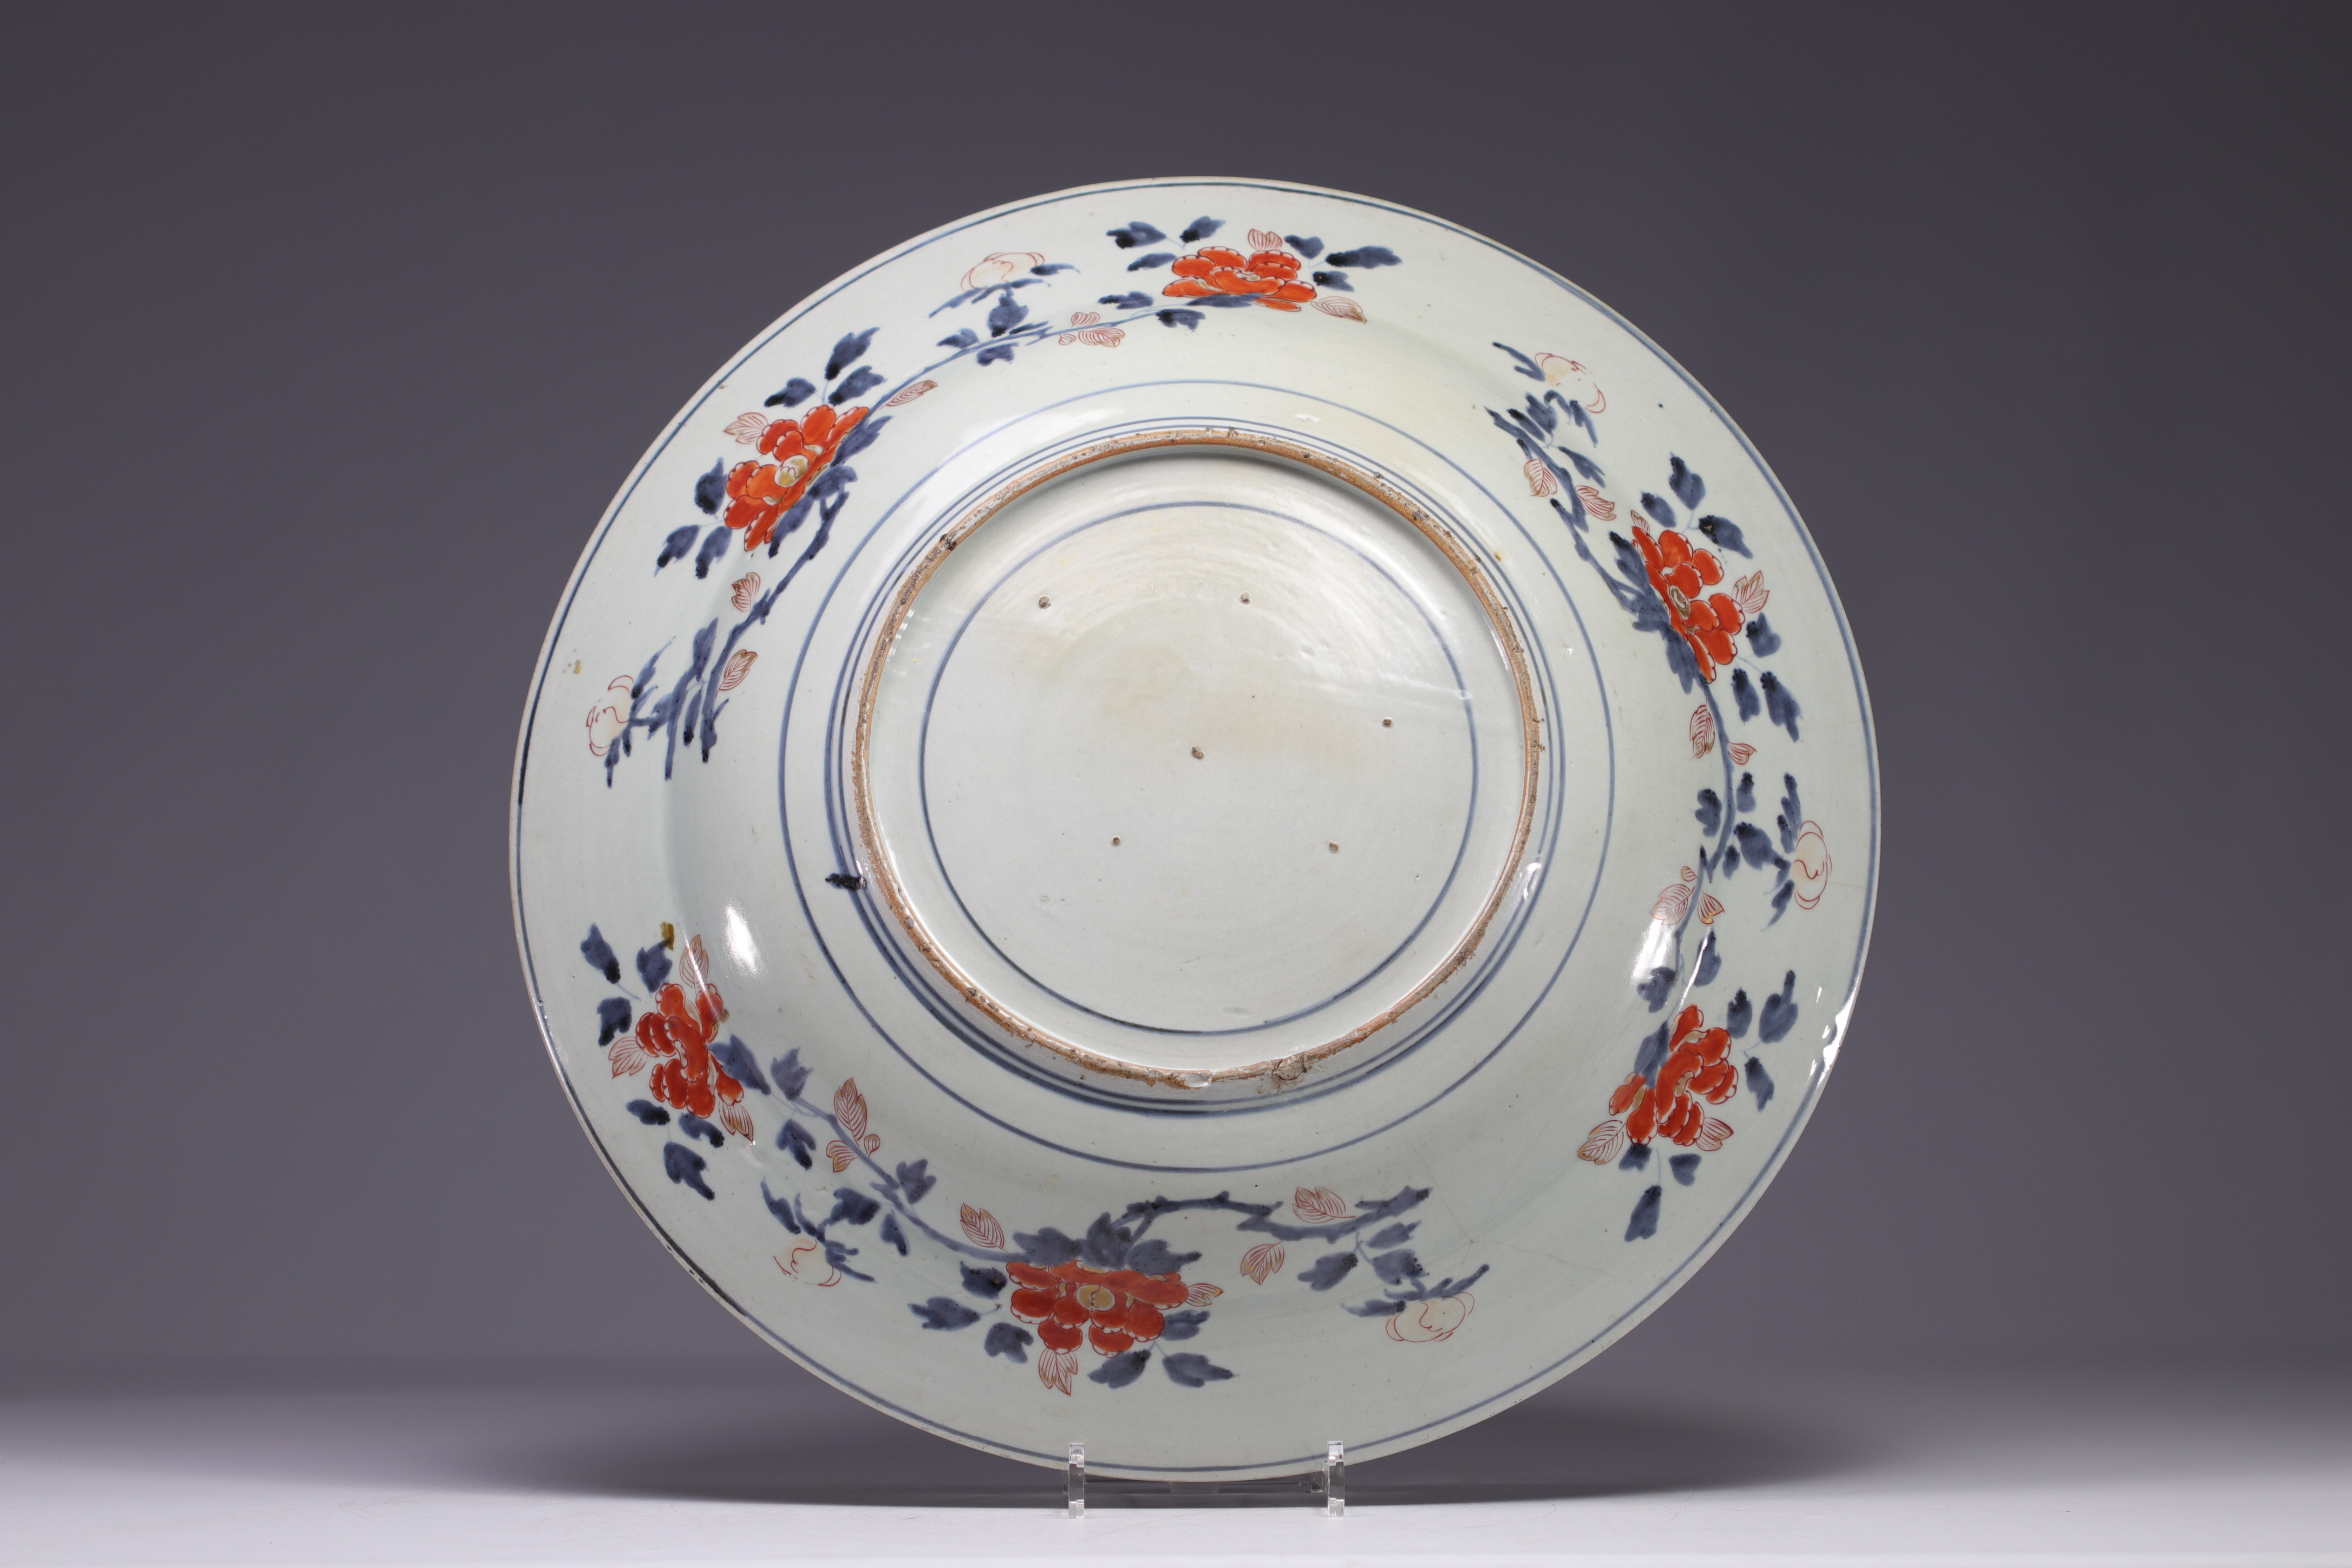 Japan - A large Japanese porcelain dish decorated with flowers, 18th century. - Image 2 of 2